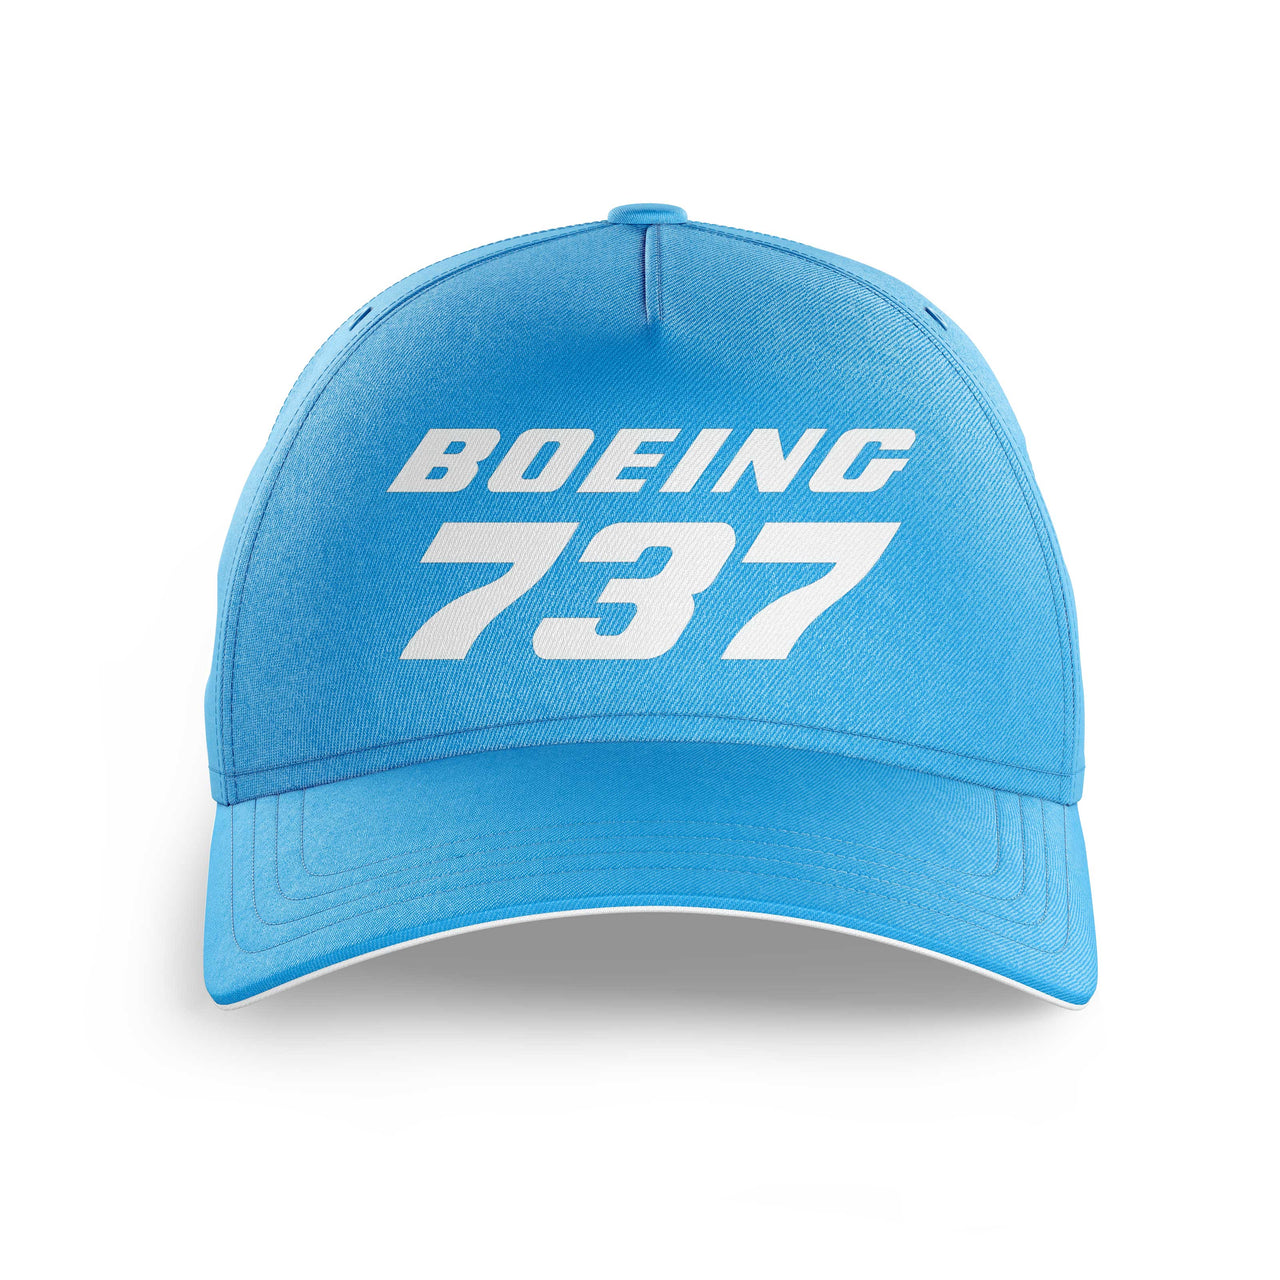 Boeing 737 & Text Printed Hats